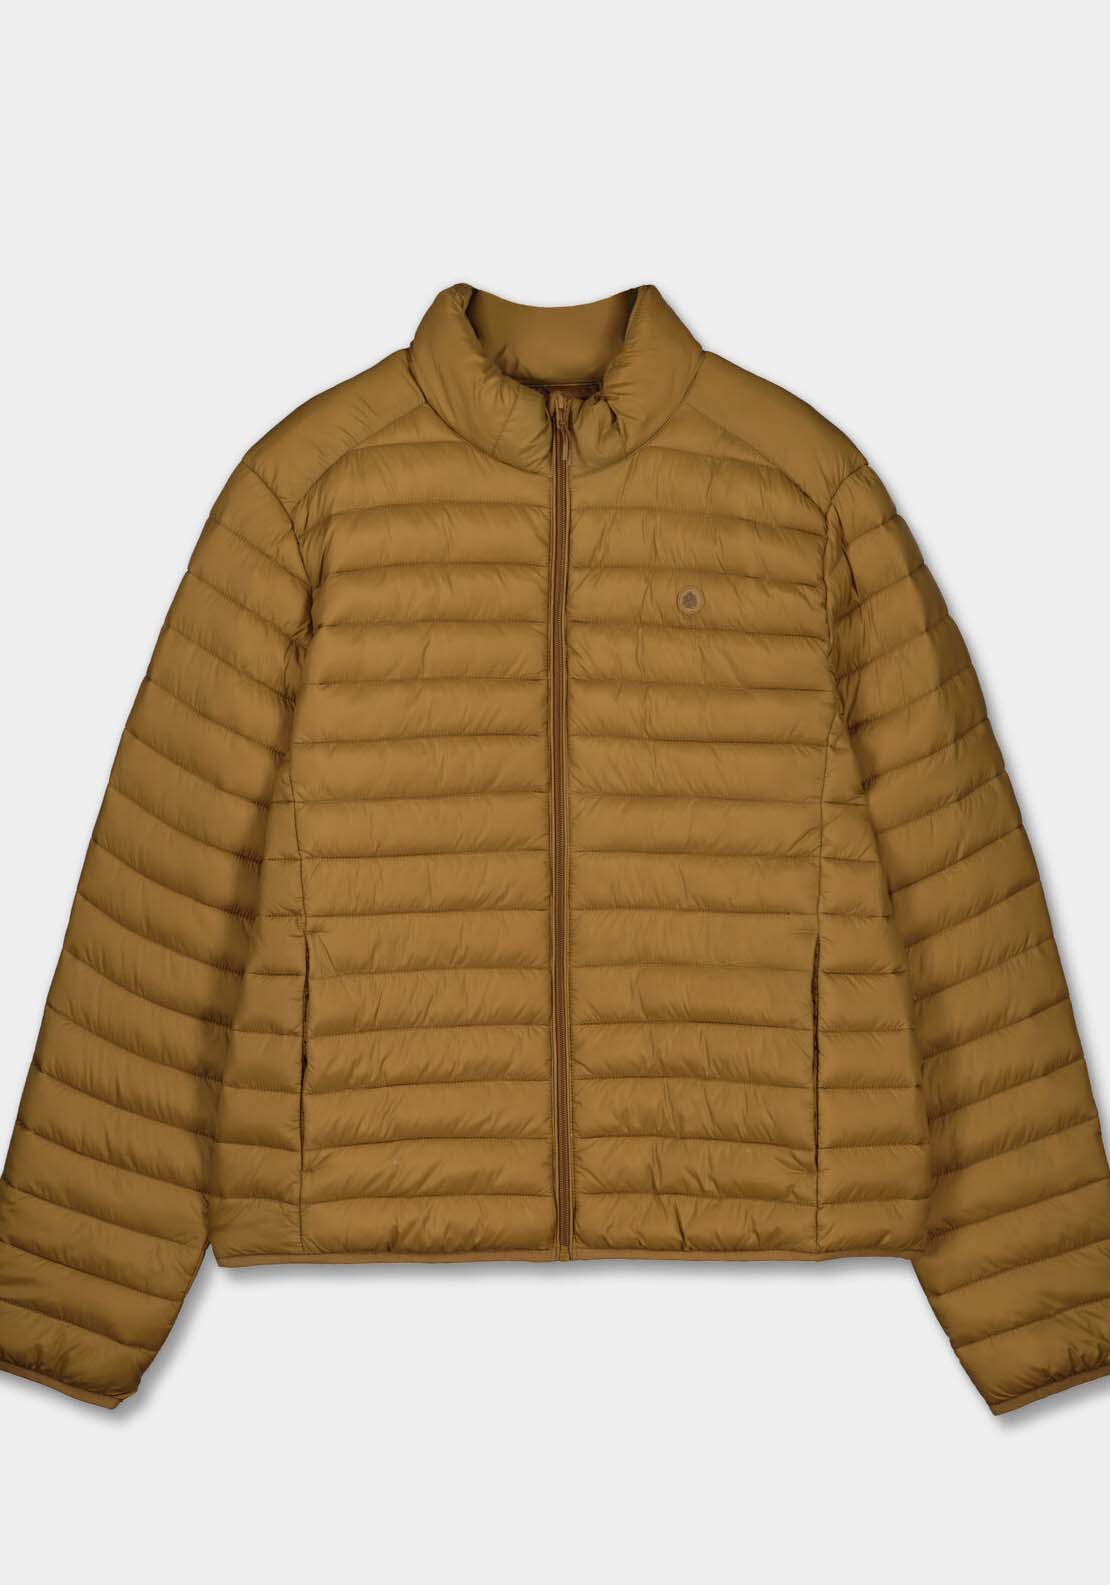 Springfield Quilted jacket - Tan 7 Shaws Department Stores